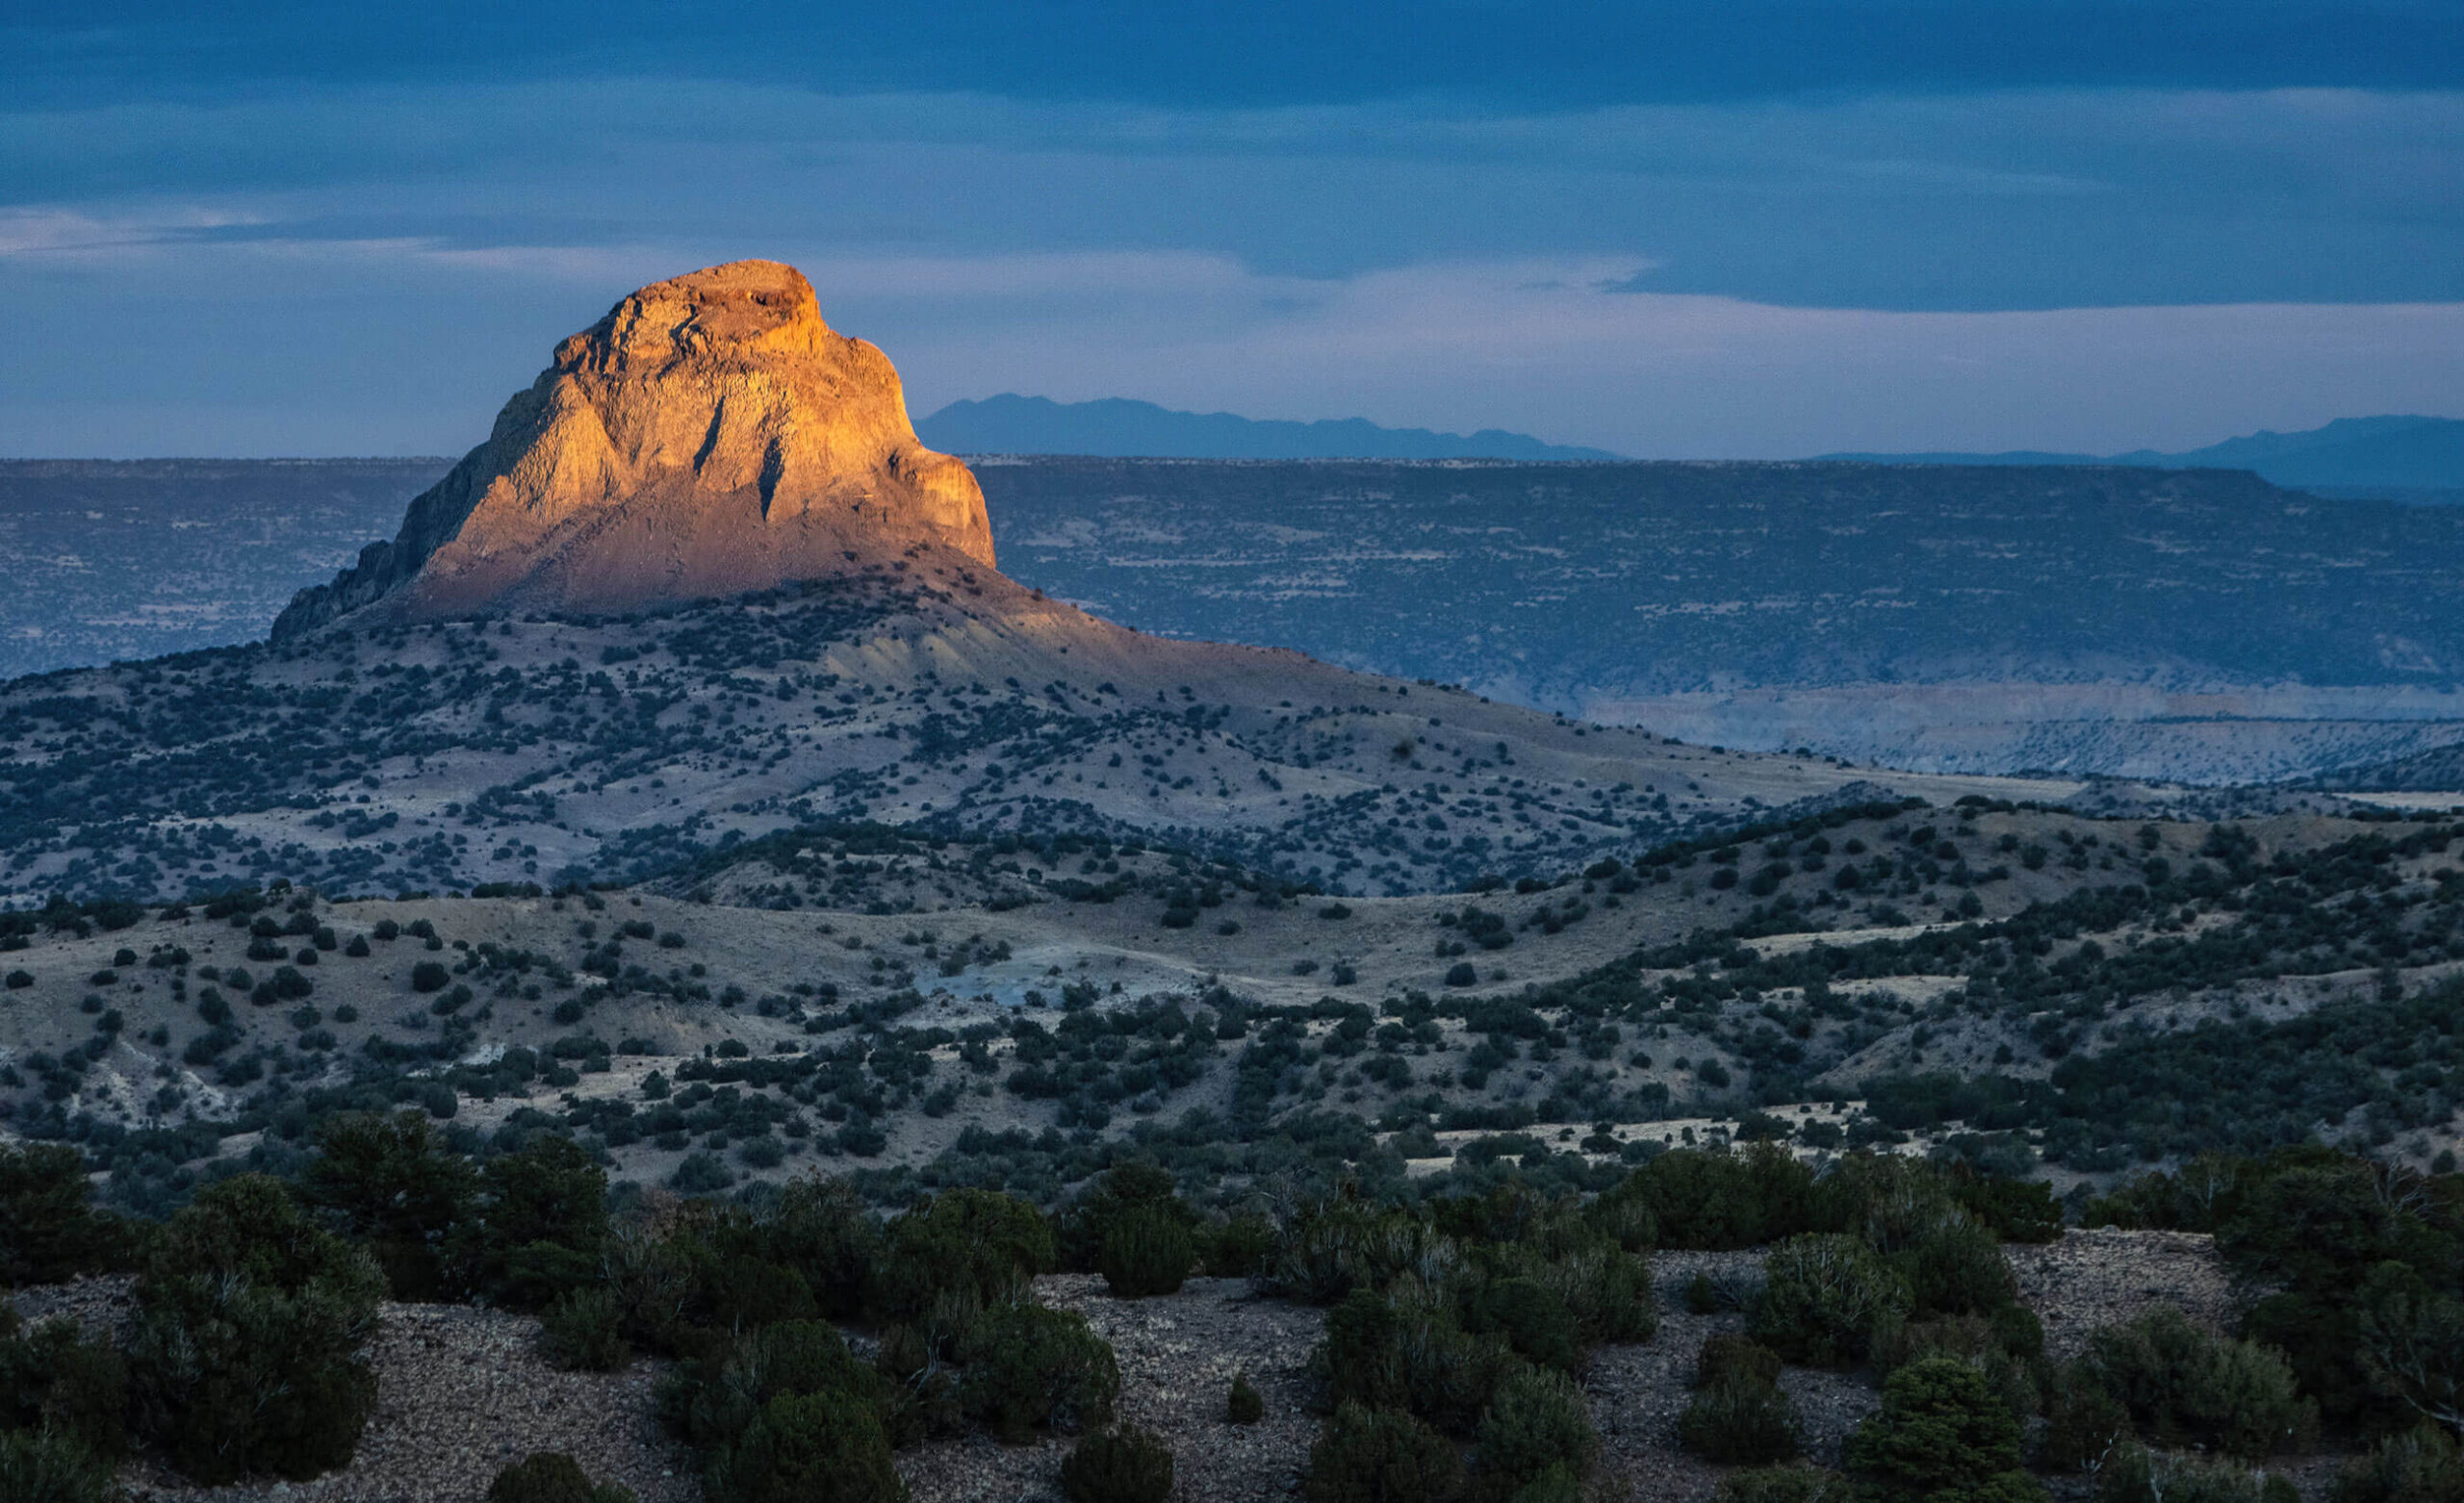 A big win for people and wildlife in New Mexico